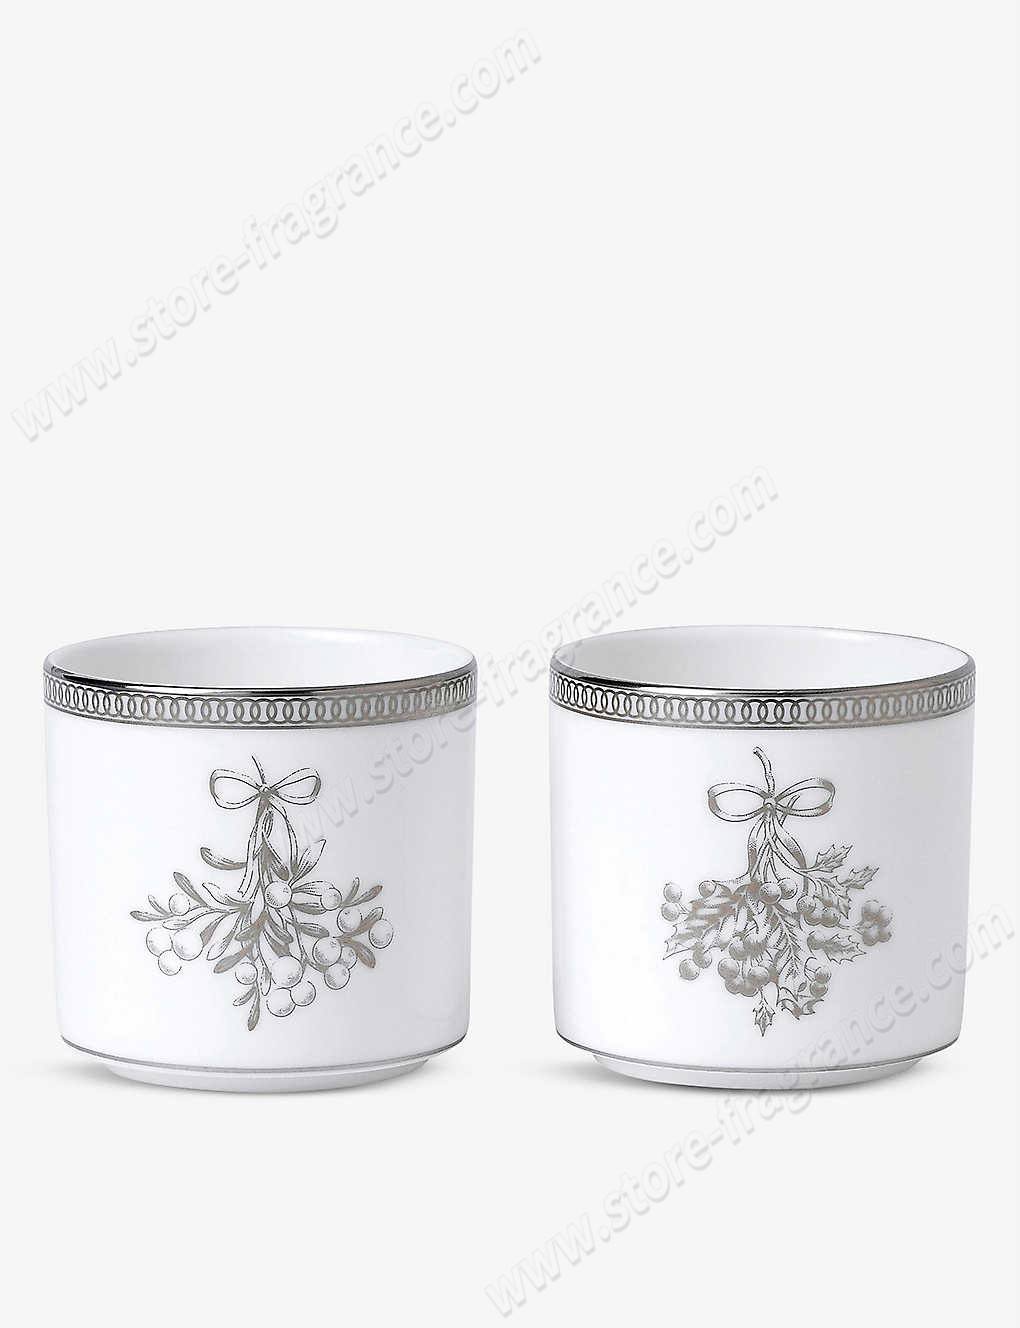 WEDGWOOD/Winter White 2-piece votive candle holder set ✿ Discount Store - WEDGWOOD/Winter White 2-piece votive candle holder set ✿ Discount Store